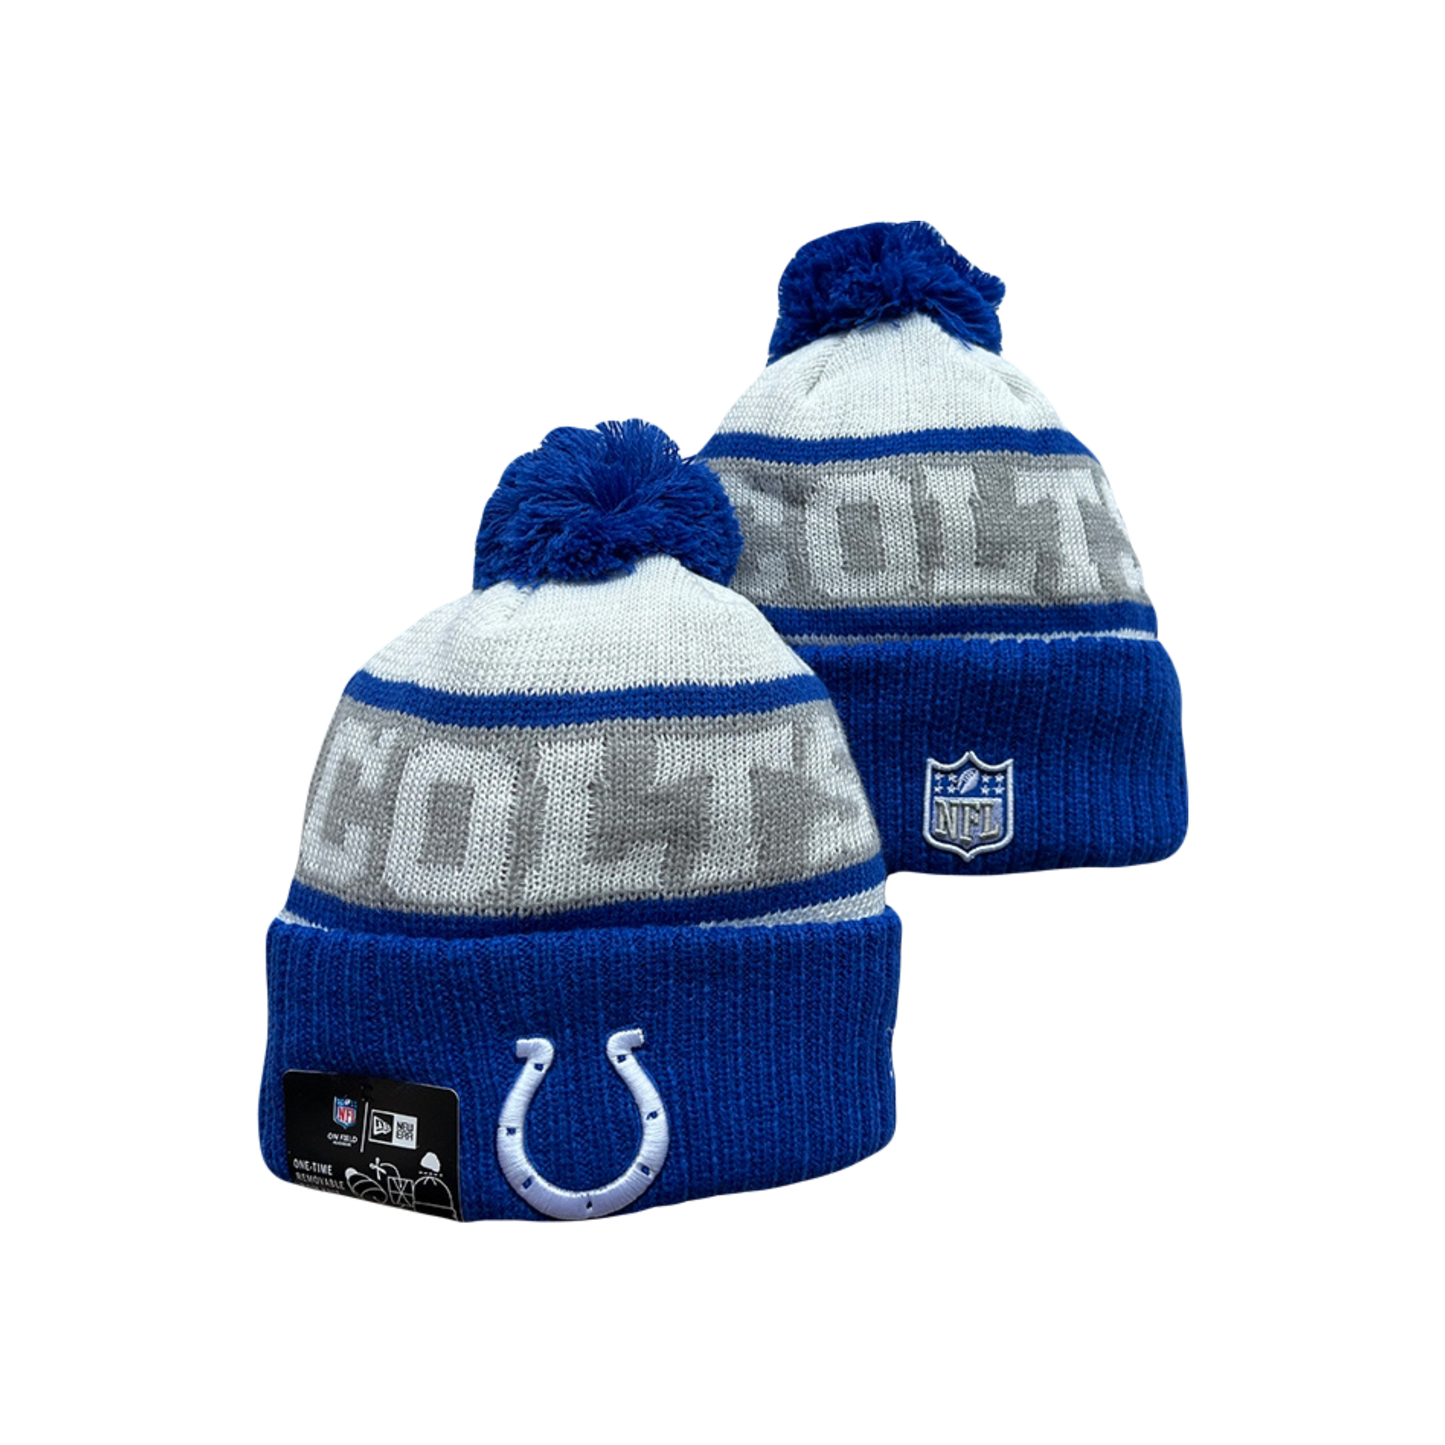 Indianapolis Colts ‘Colts Country’ NFL New Era Knit Beanie